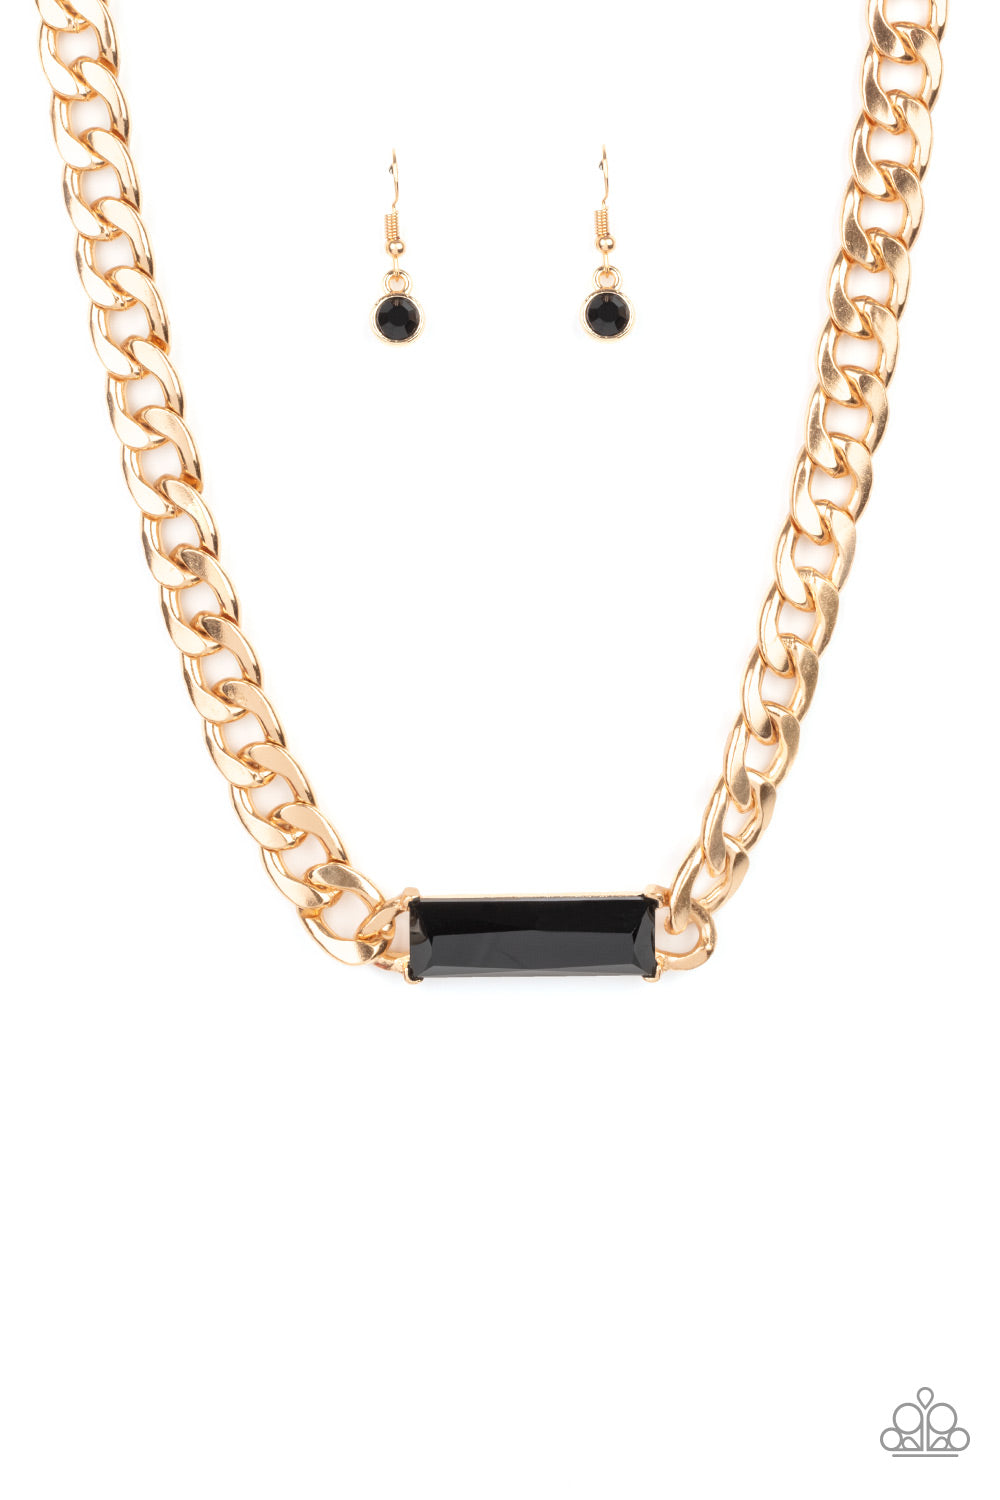 Paparazzi Accessories - Urban Royalty #N613 - Gold Necklace